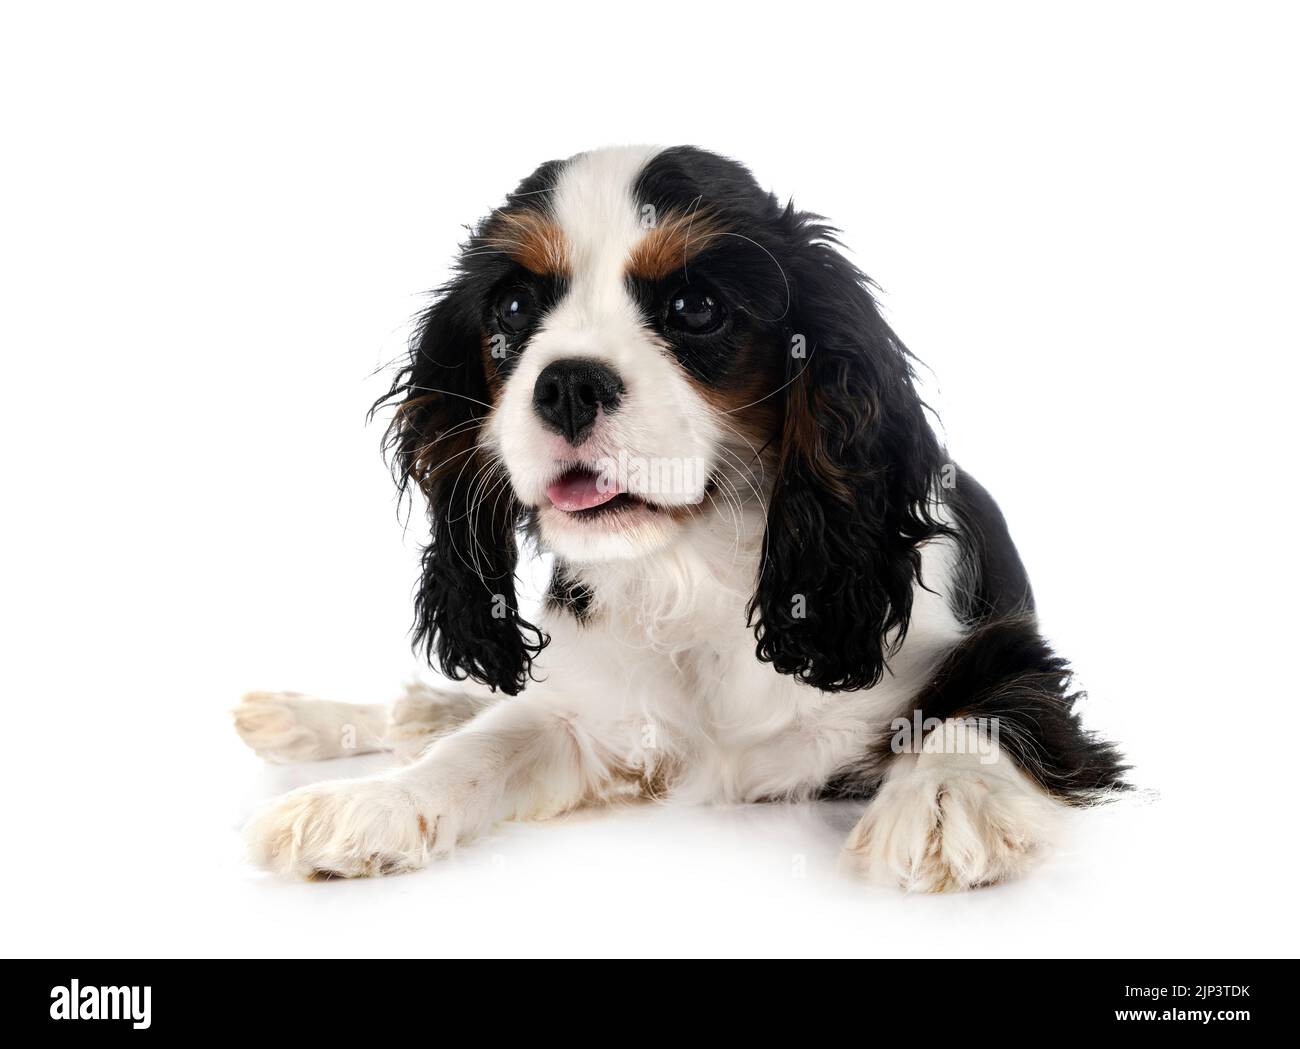 puppy cavalier king charles in front of white background Stock Photo